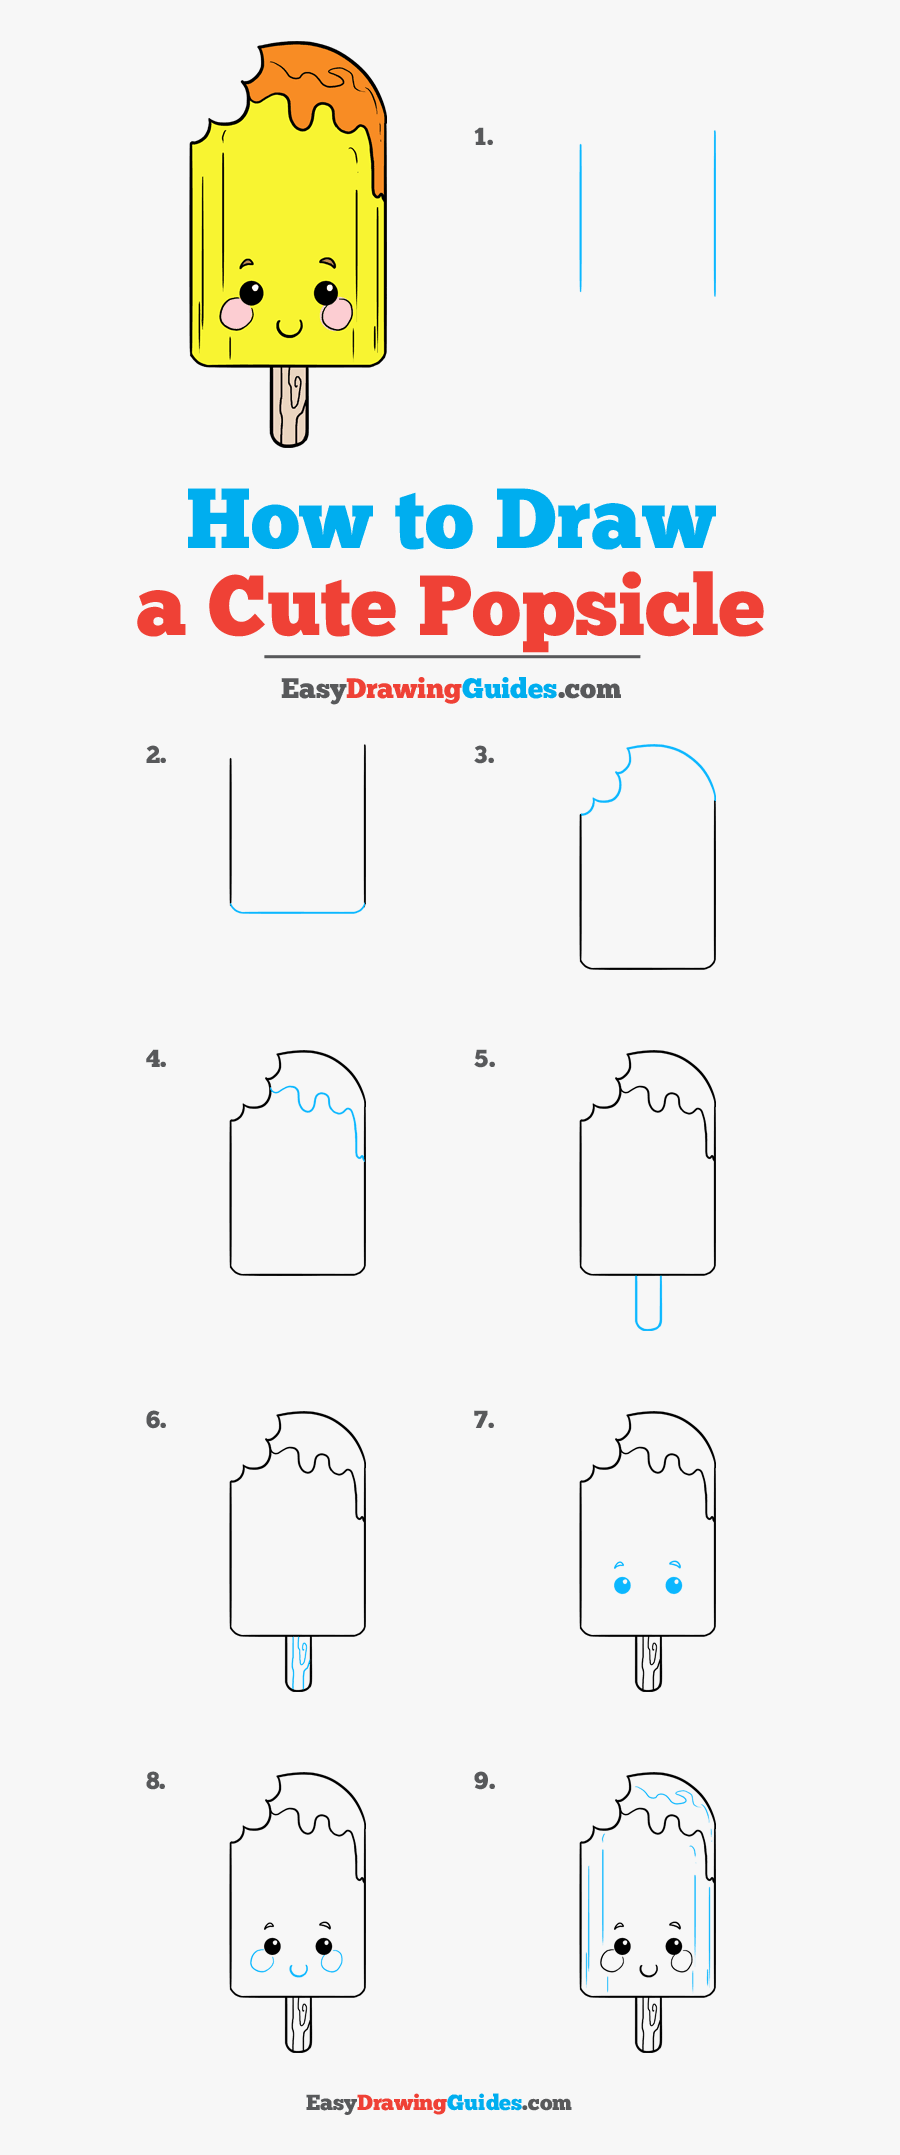 How To Draw Cute Popsicle - Draw A Popsicle Step By Step, Transparent Clipart